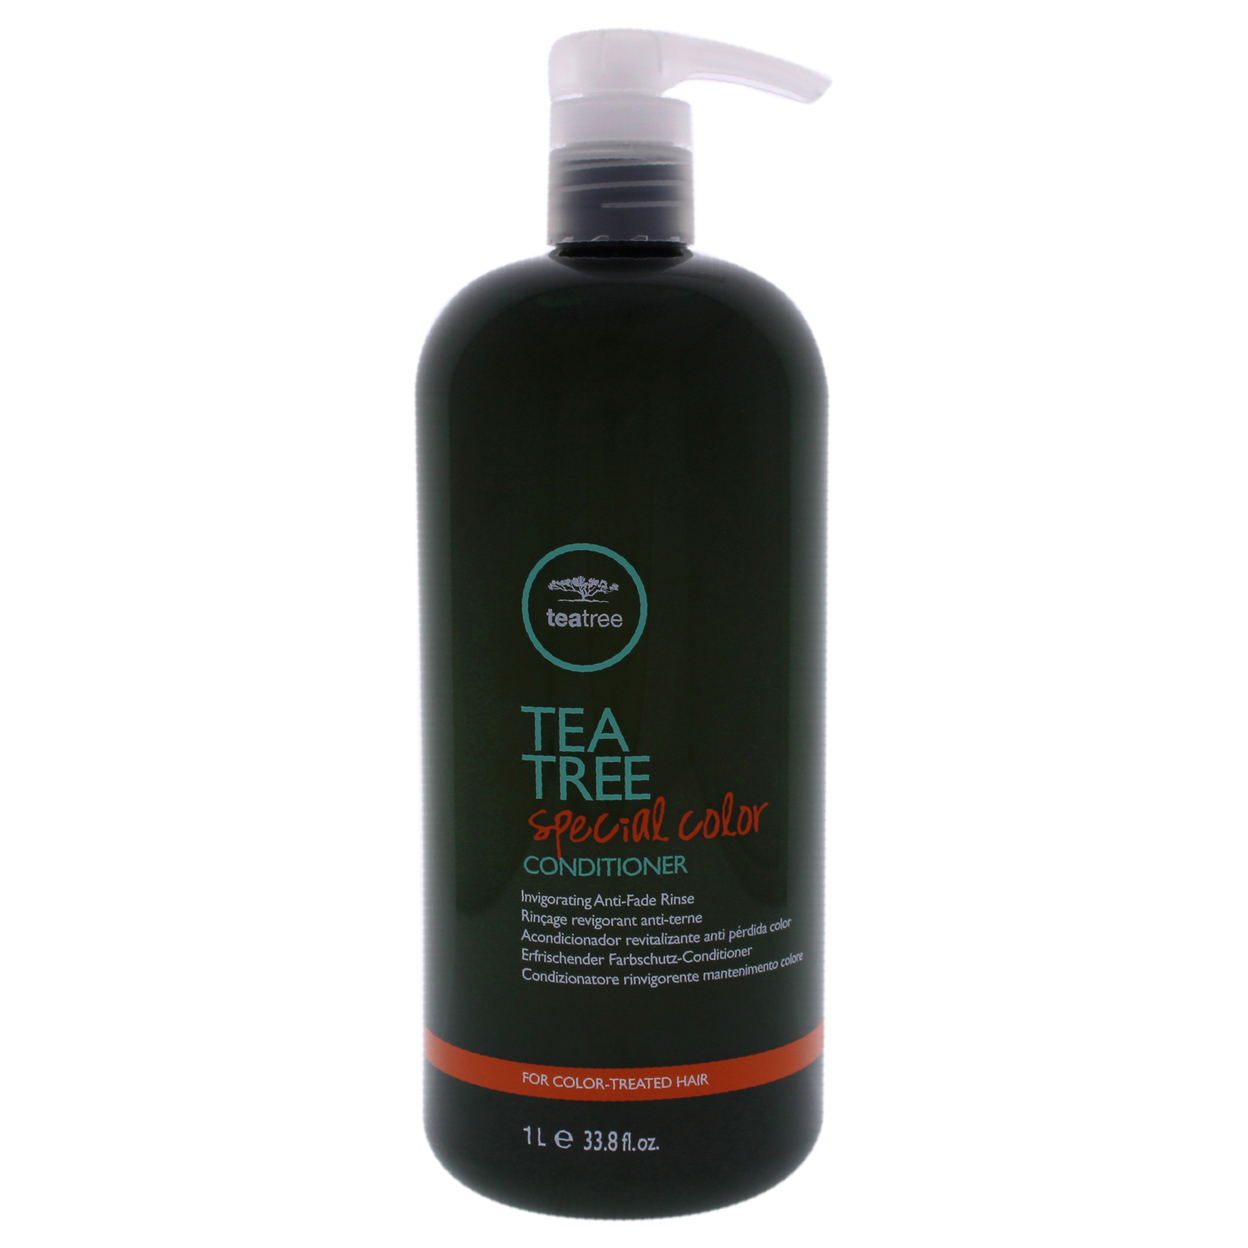 Paul Mitchell Unisex HAIRCARE Tea Tree Special Color Conditioner 33.8 Oz